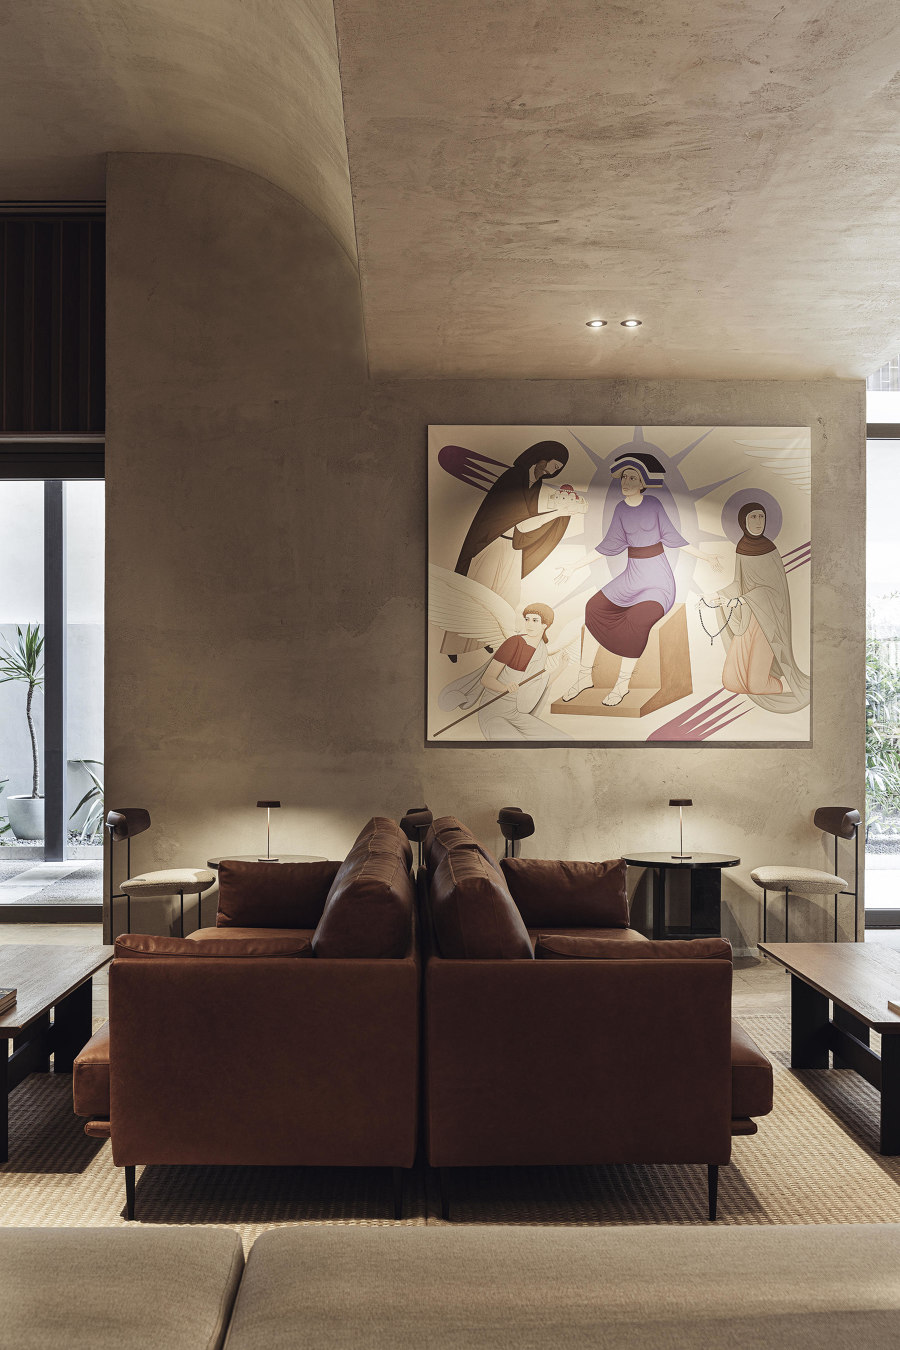 Newly opened hotel interiors that reflect their environment | Novità